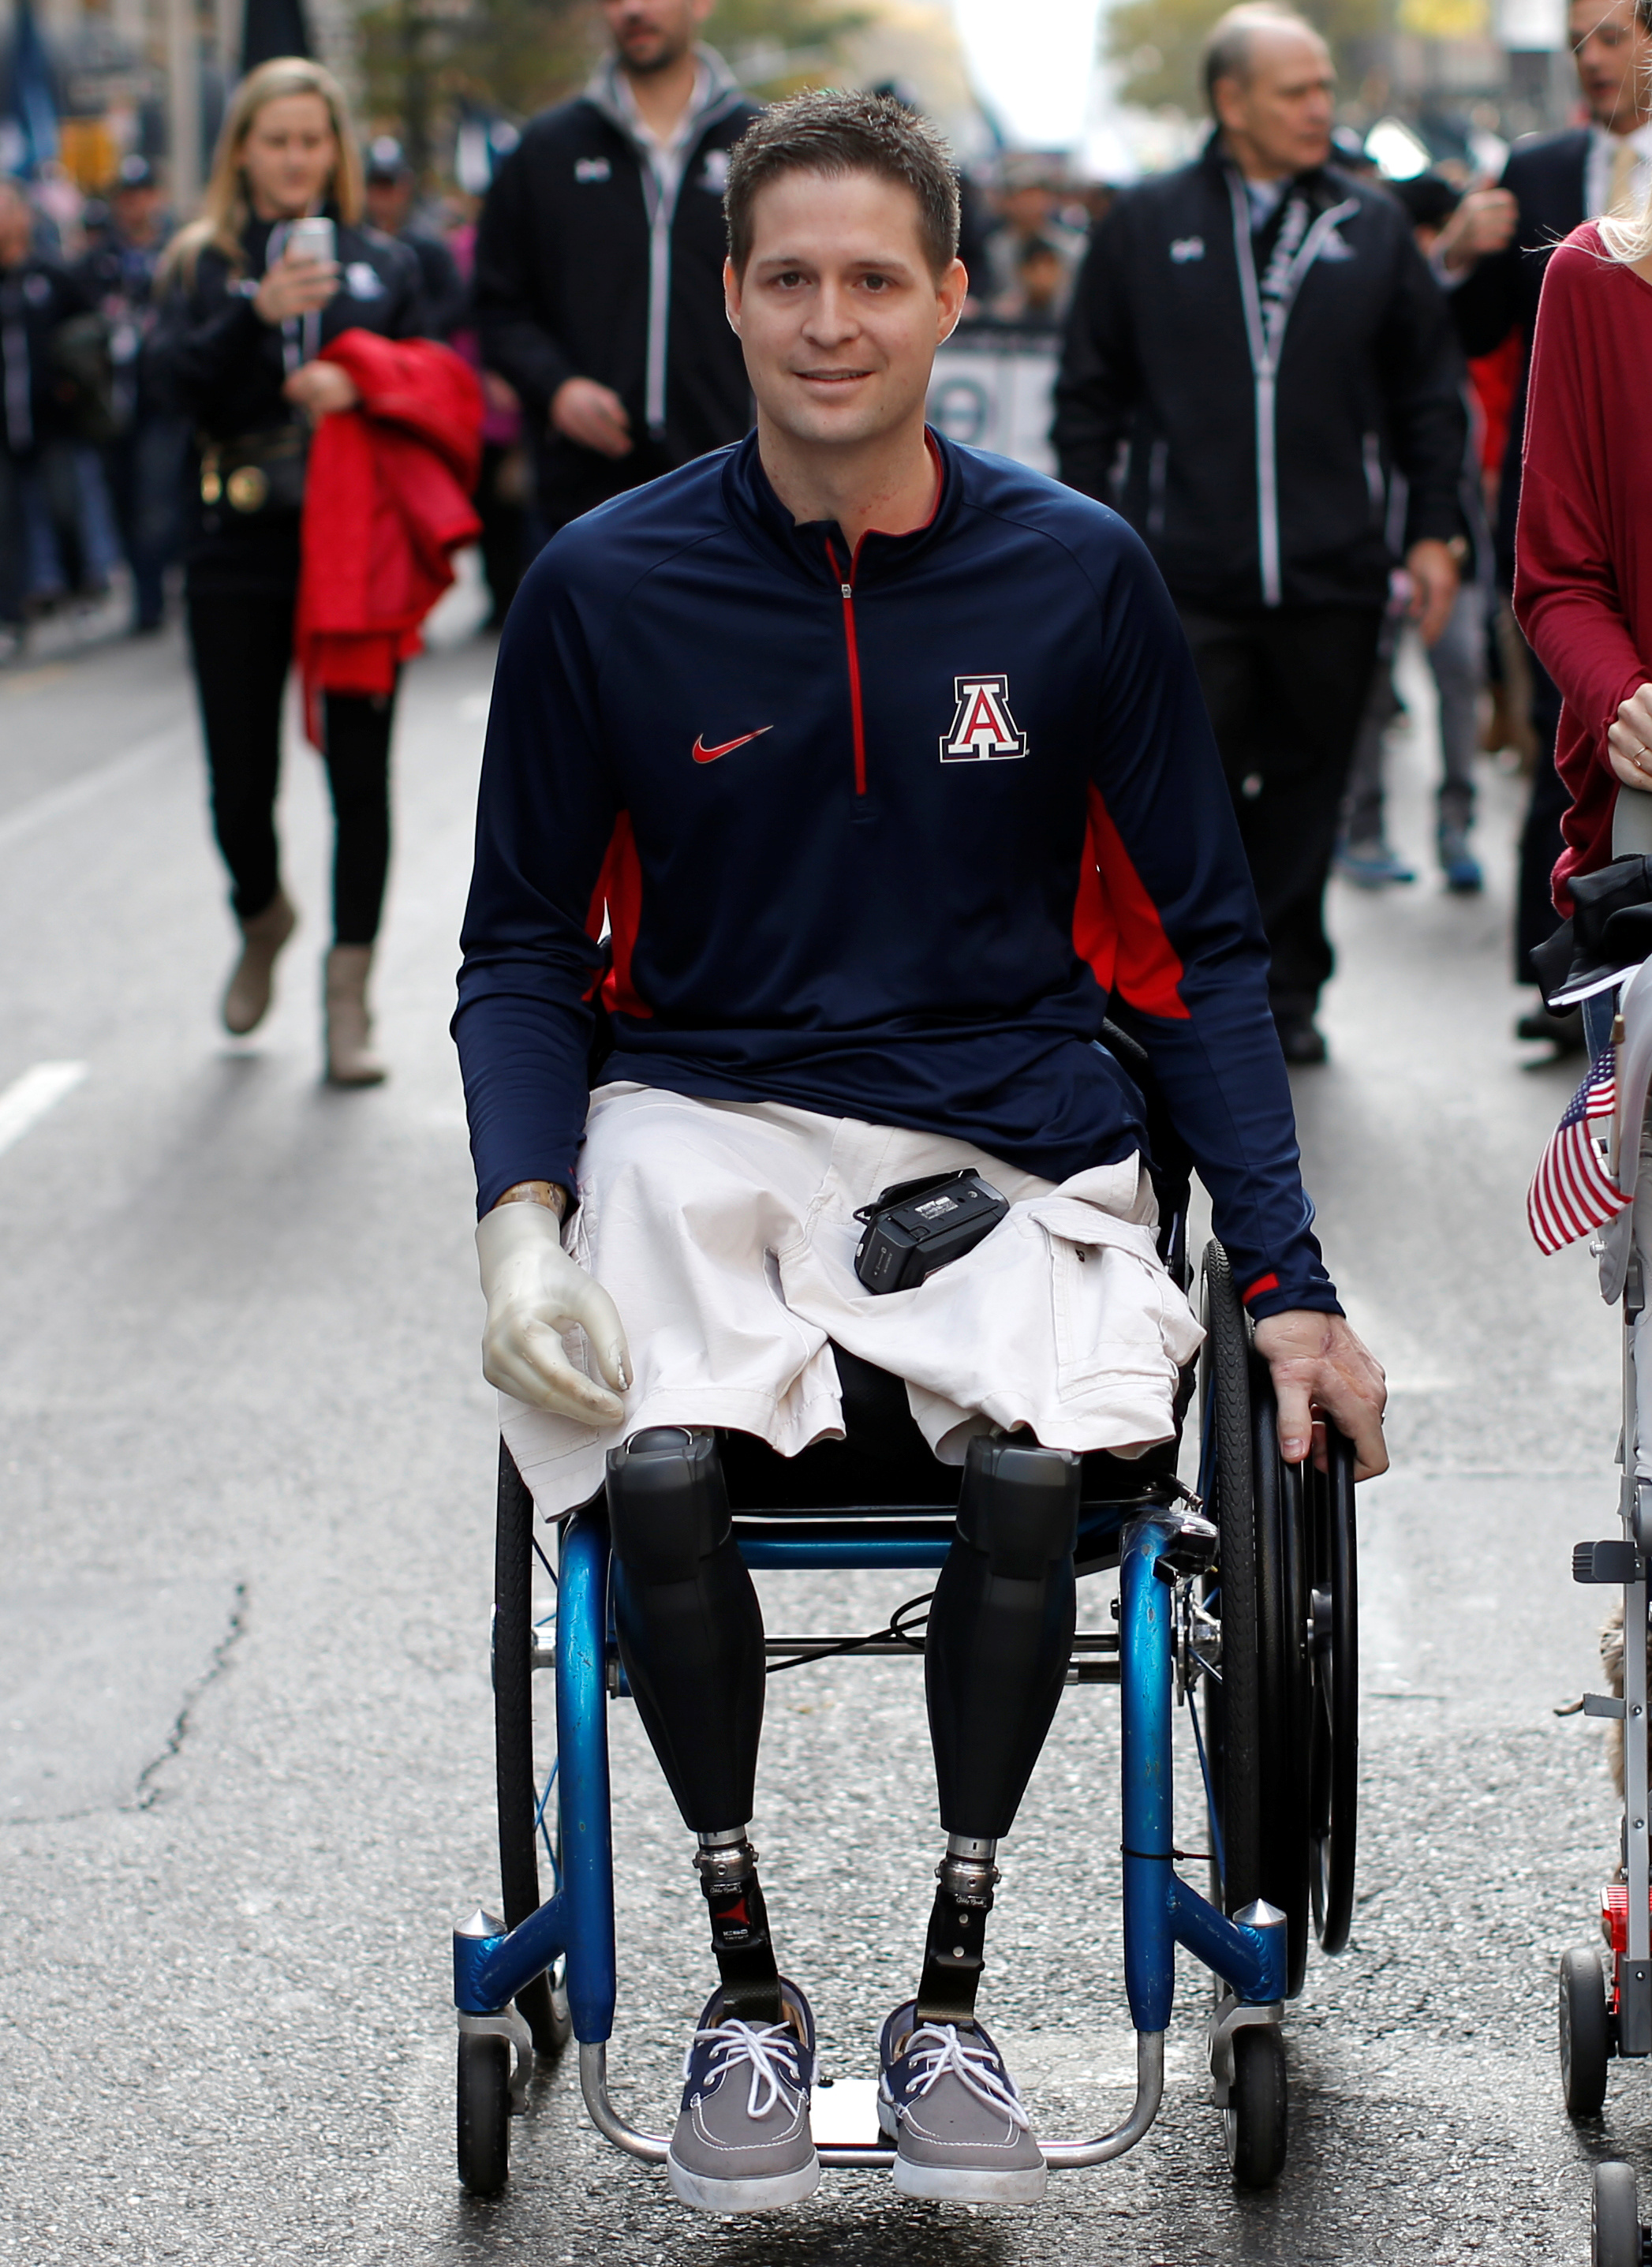 A triple amputee wheels himself in a parade with his one available hand.